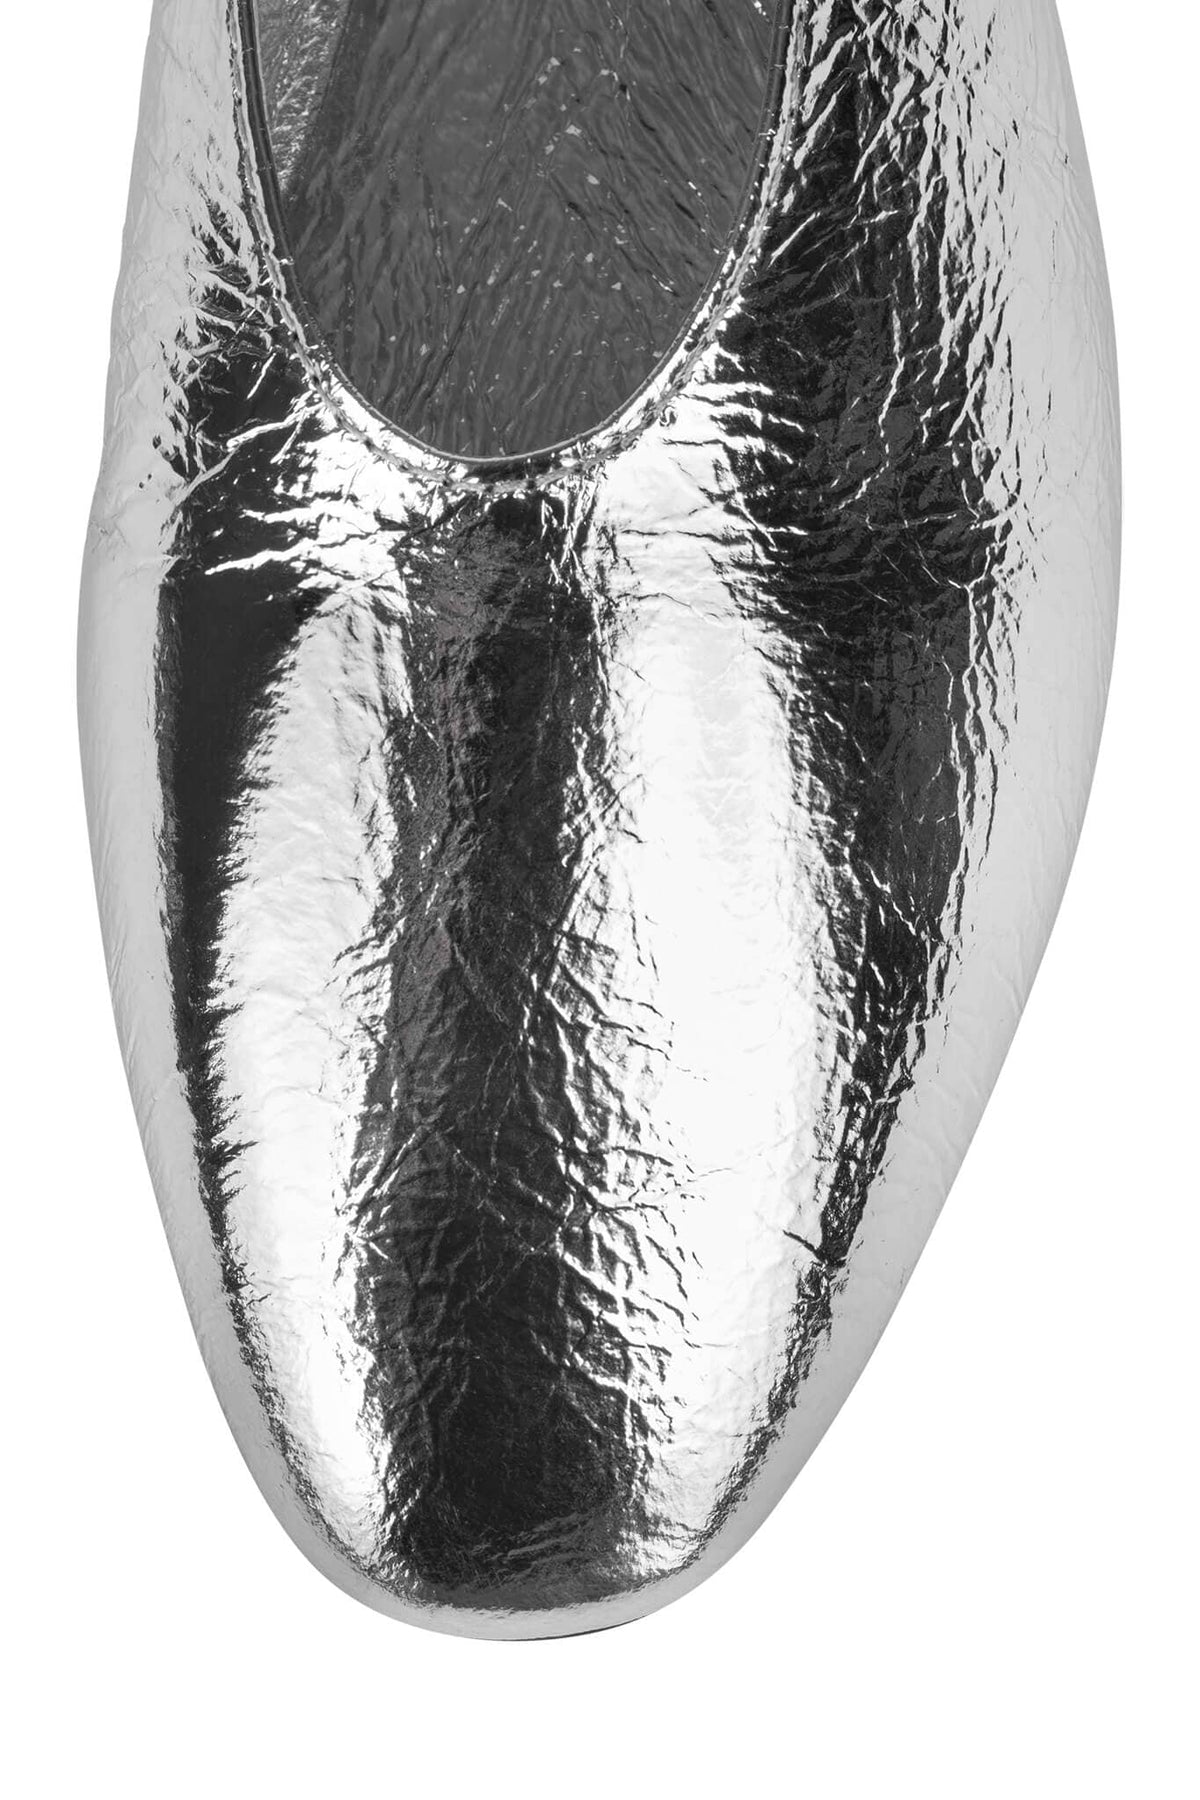 ROMP Jeffrey Campbell Flats Silver Crinkle